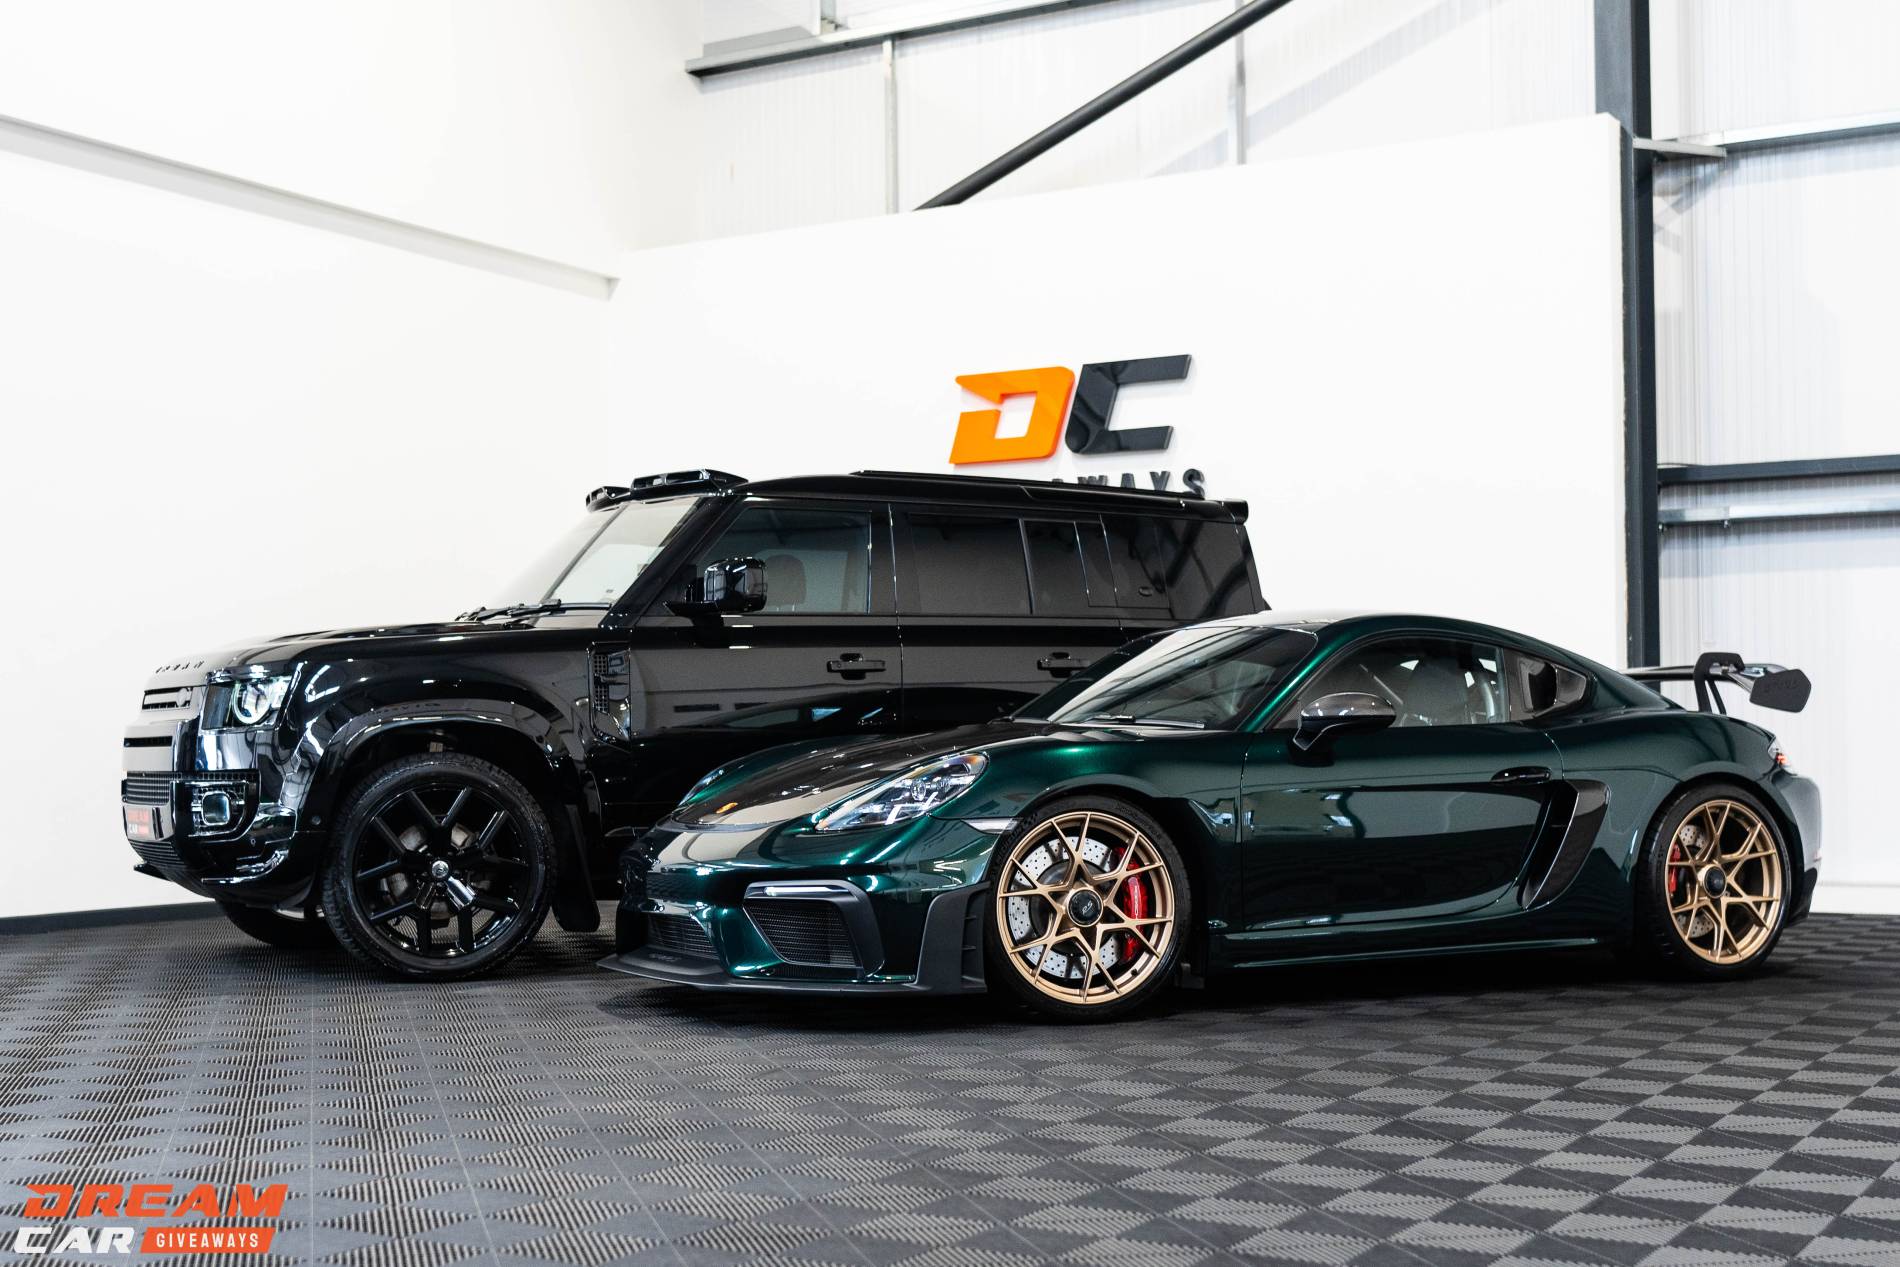 Win this GT4 RS Weissach & Urban Defender 110 & £5,000 or £170,000 Tax Free